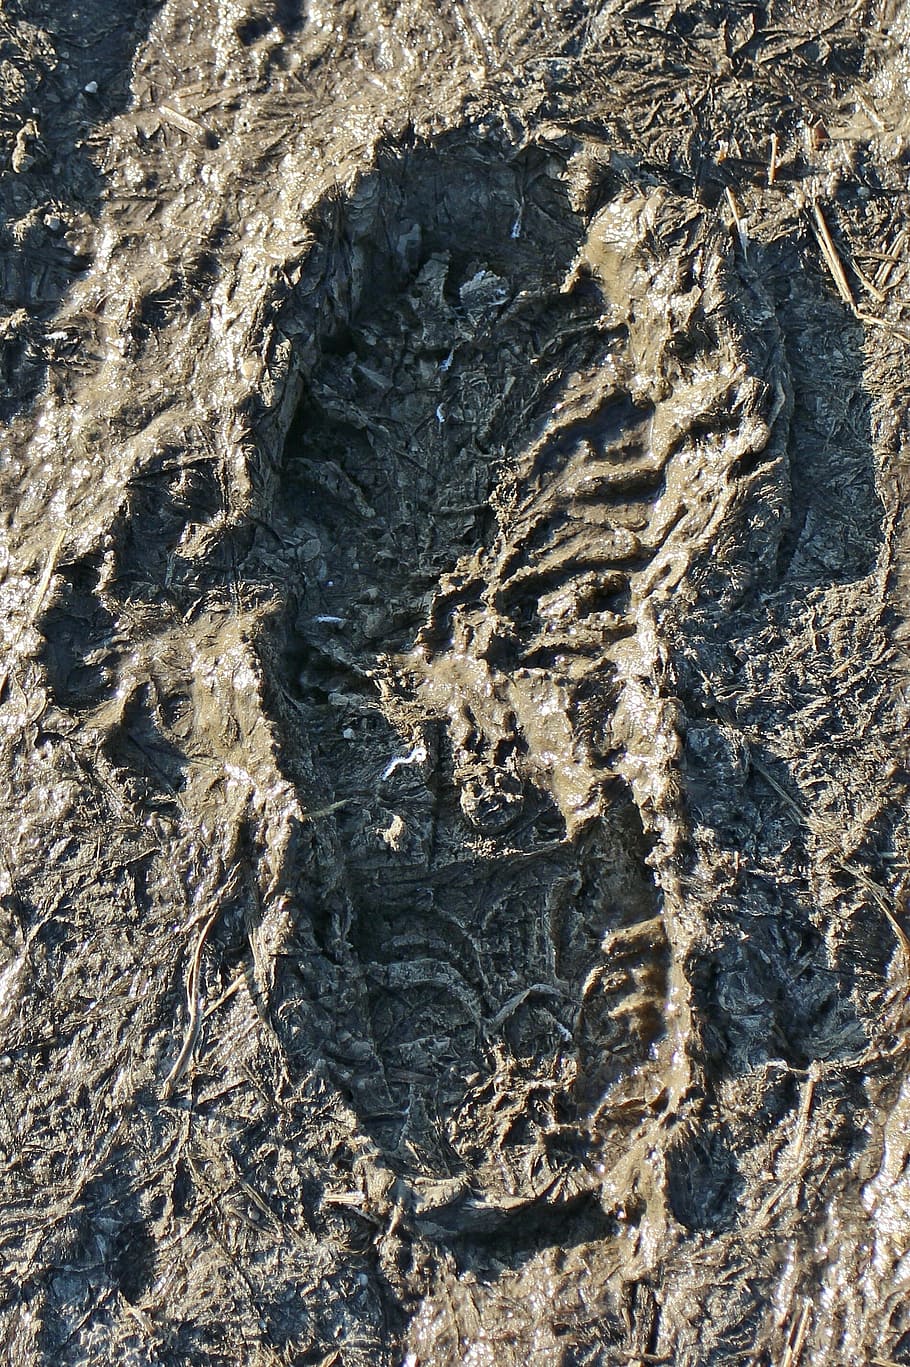 footprint, reprint, trace, traces, human, footprints, mud, ground, full frame, backgrounds